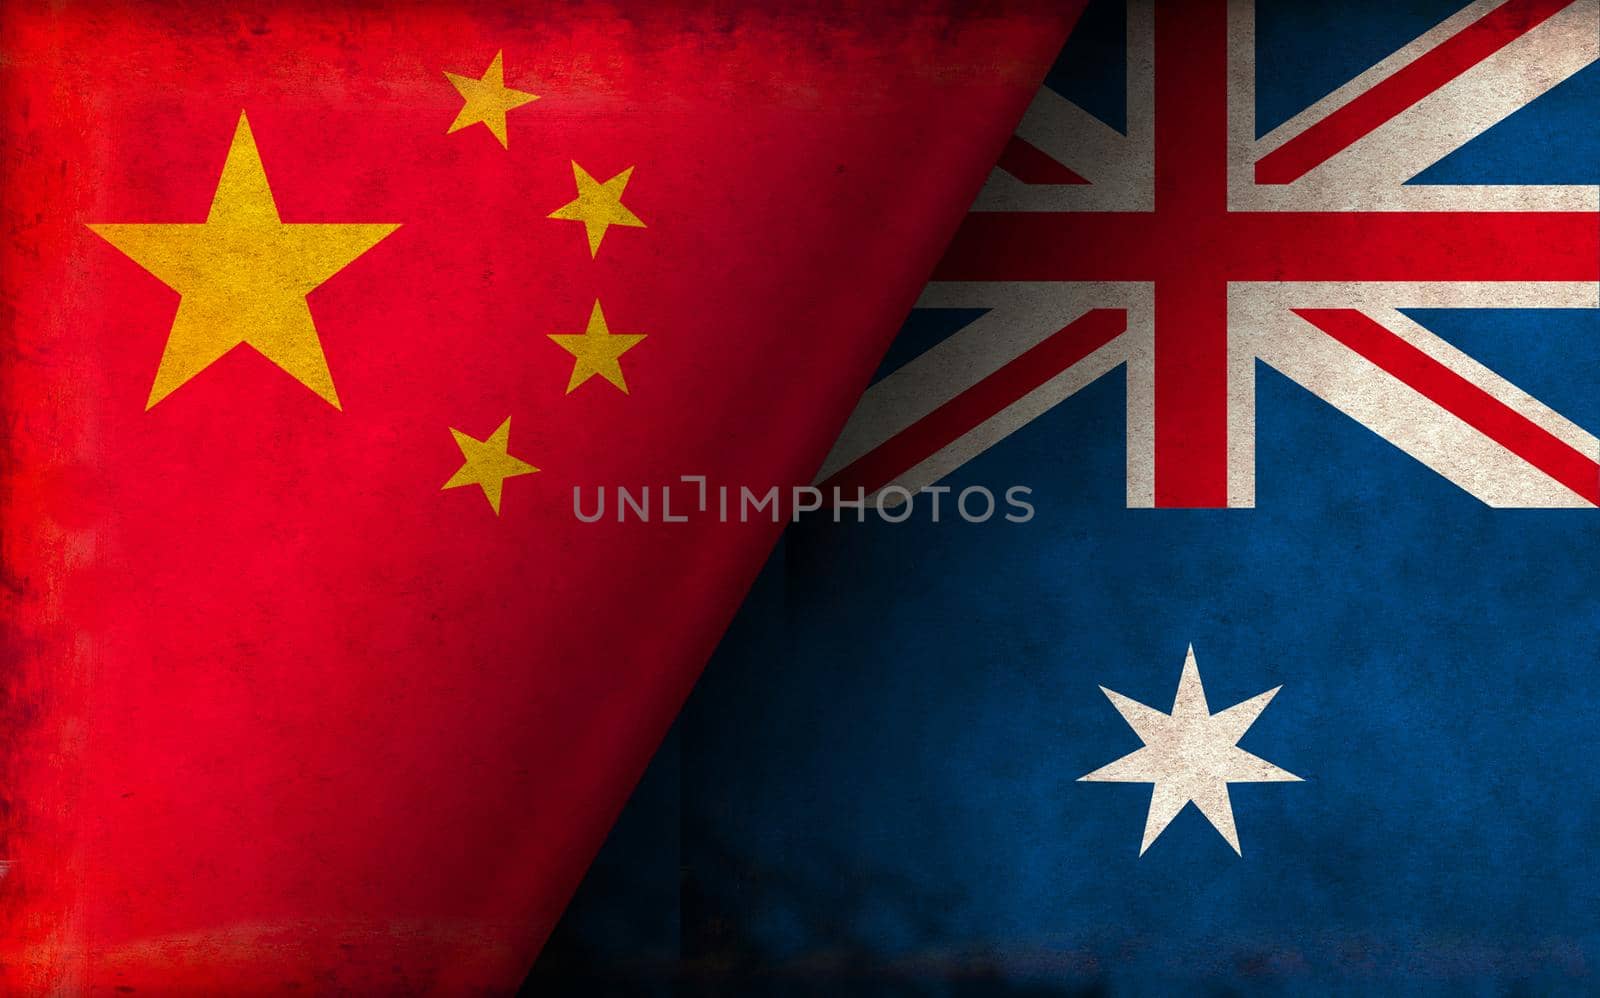 Grunge country flag illustration / China vs Australia (Political or economic conflict, Rival ) by barks